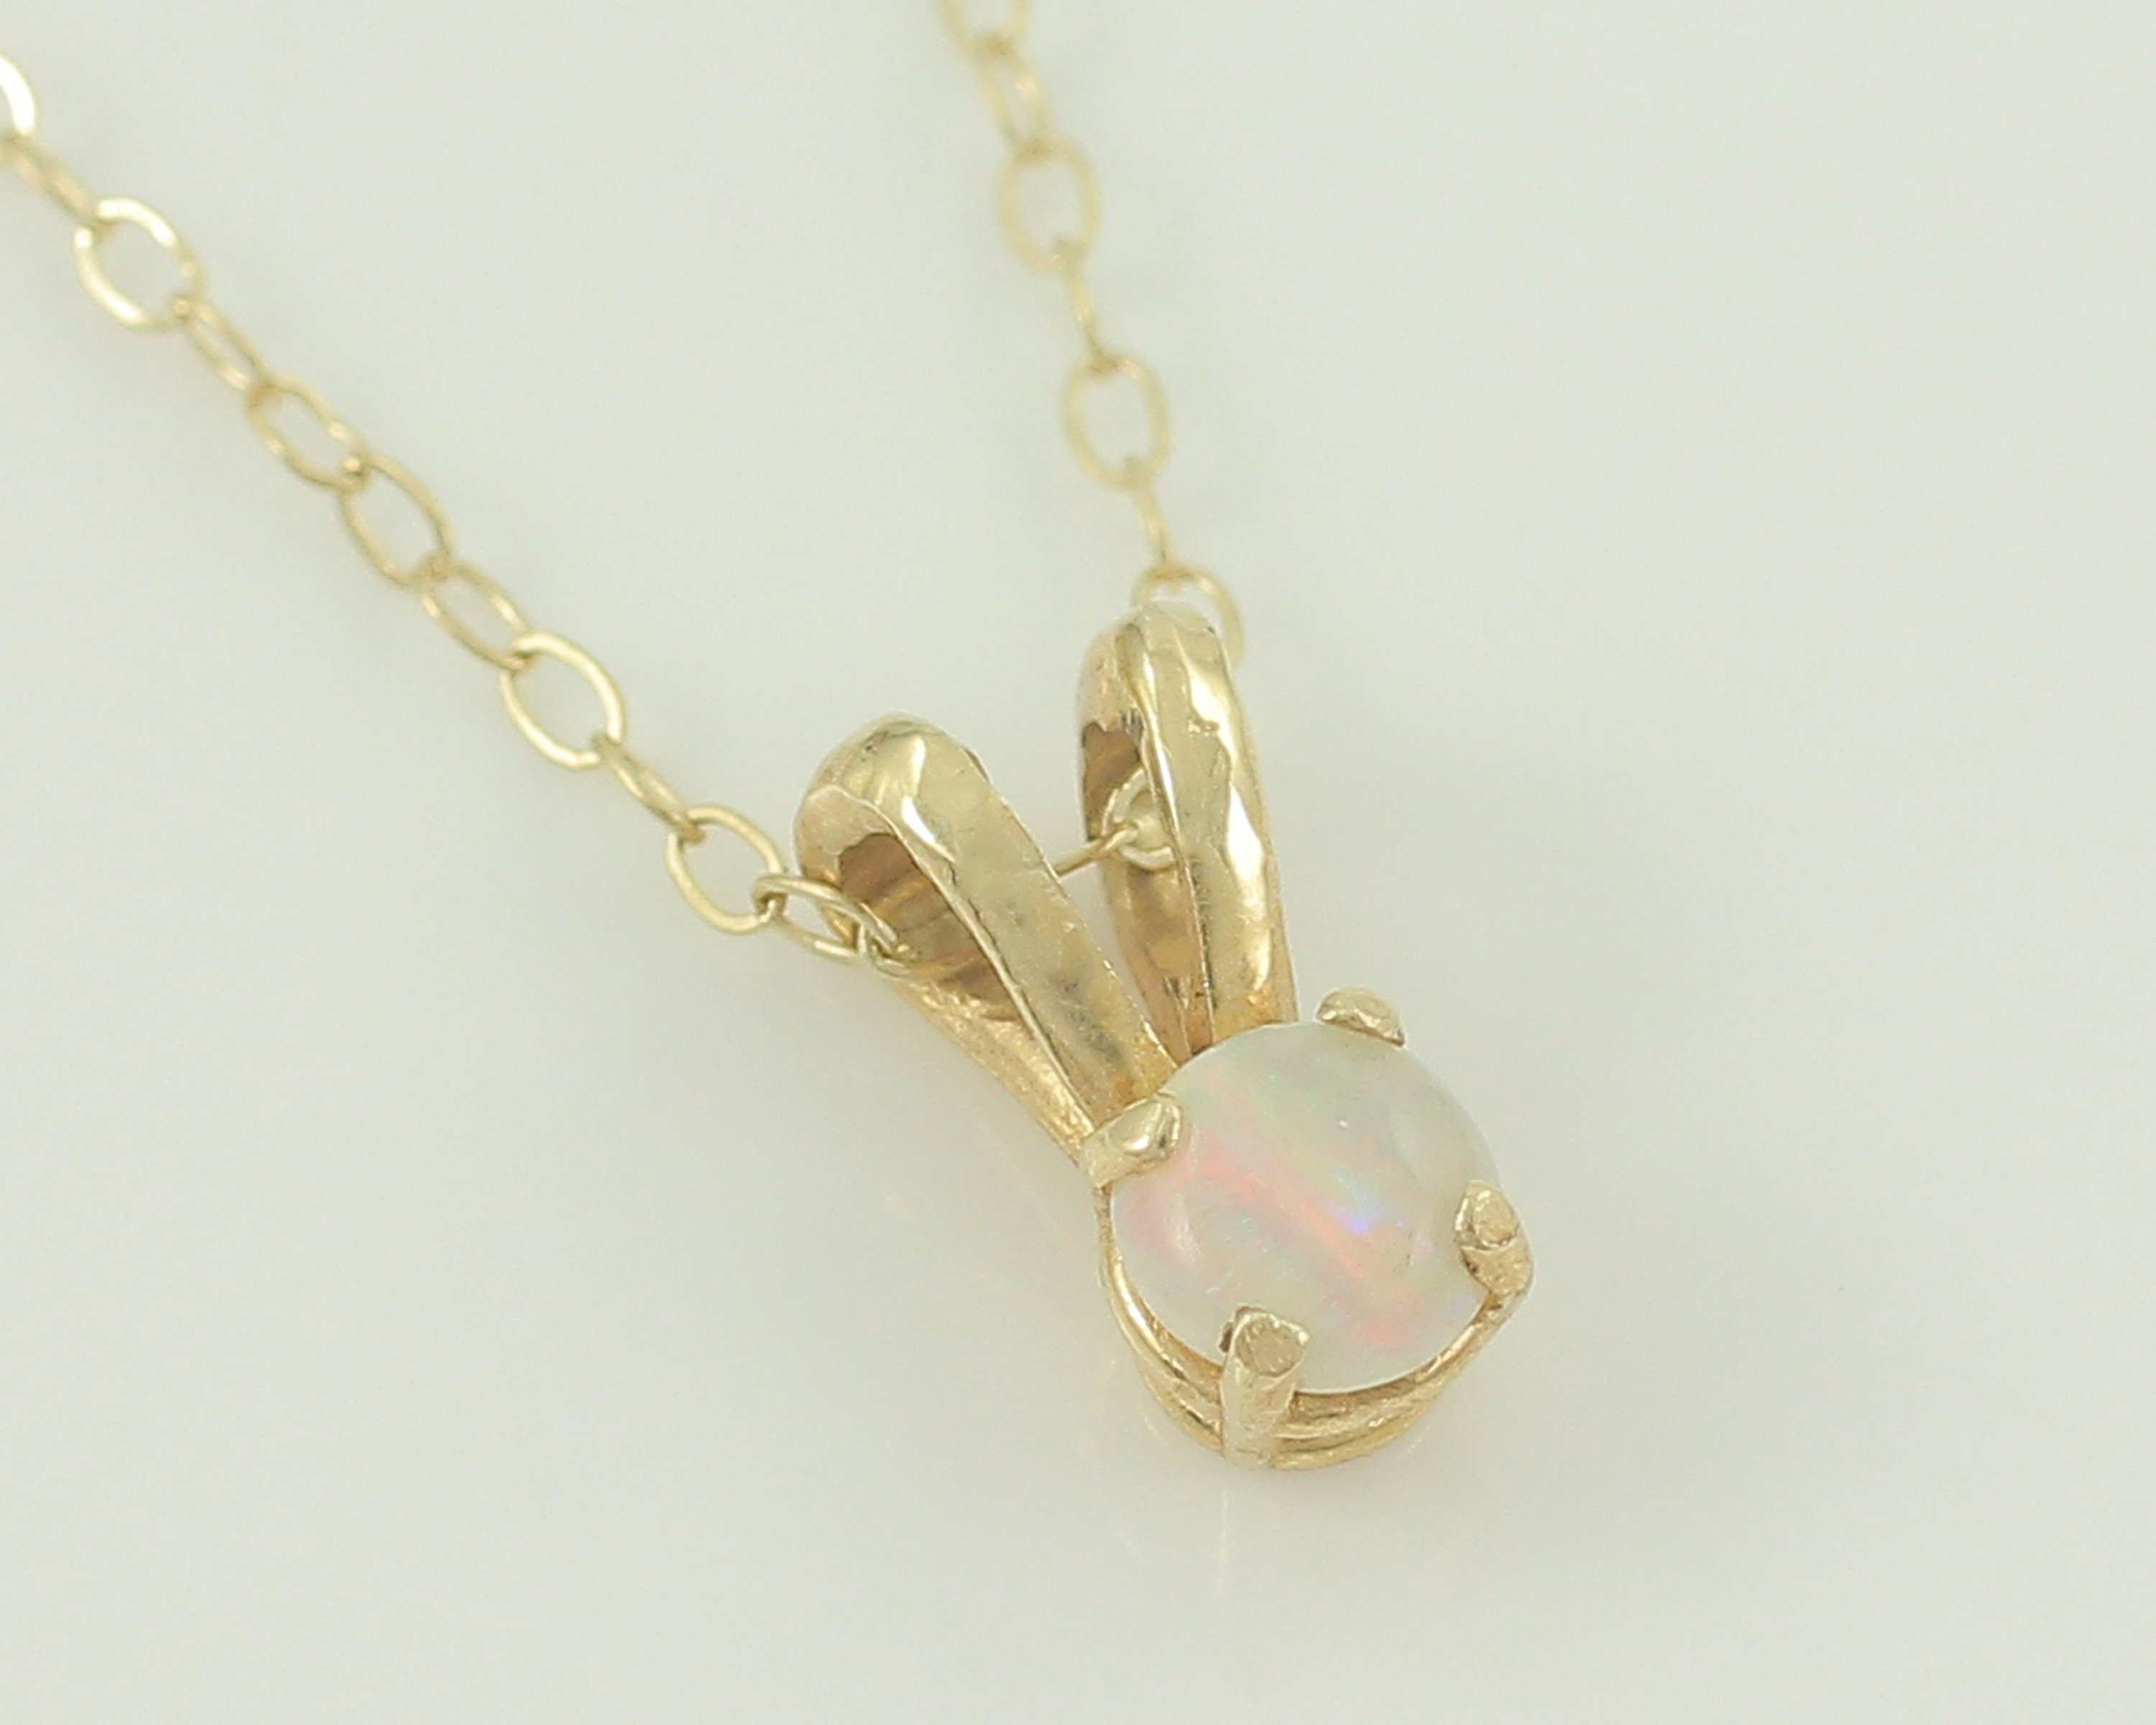 VINTAGE HARLEQUIN FIRE OPAL NECKLACE CHAIN (PINK-GOLD) GOLD PLATED chain  blue | eBay